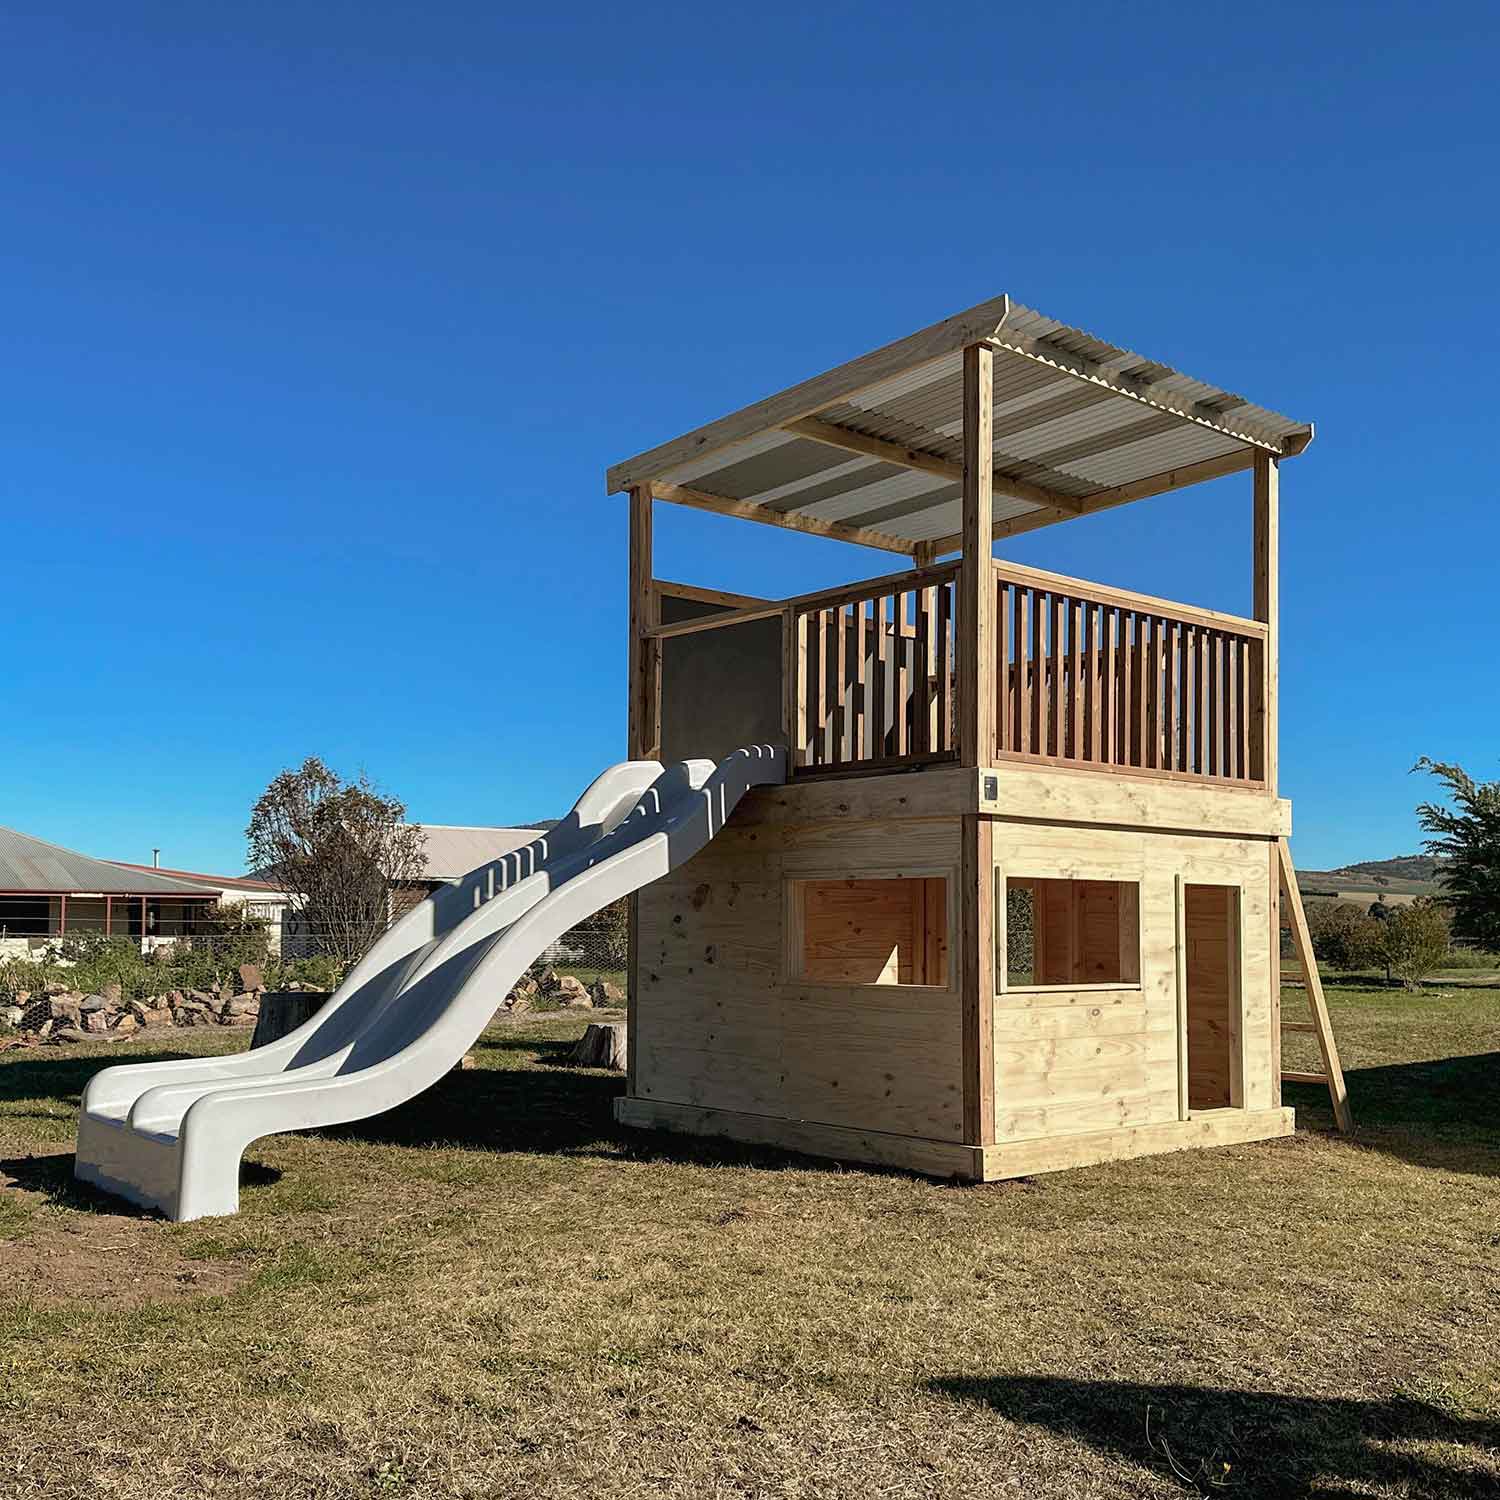 Timber Raised Platform Cubby House with Slide - For Primary Schools & Early Learning Centres - Hand Built in Australia by Castle & Cubby. 